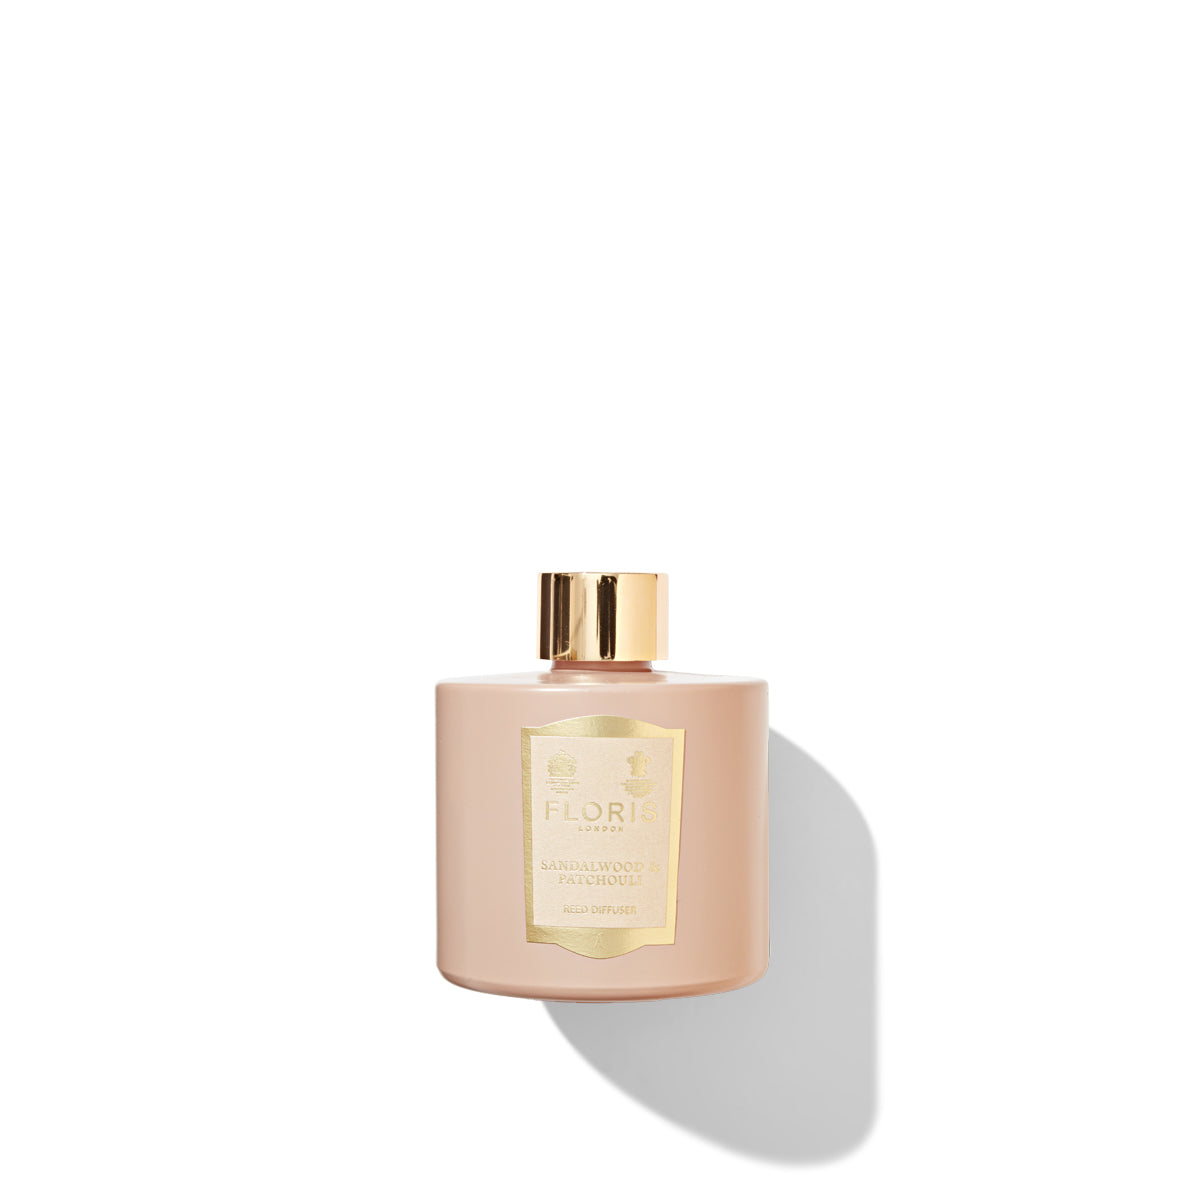 A pink bottle with a gold cap and a label of Floris London Sandalwood & Patchouli - Reed Diffuser against a white background, exuding an inviting woody amber aroma.